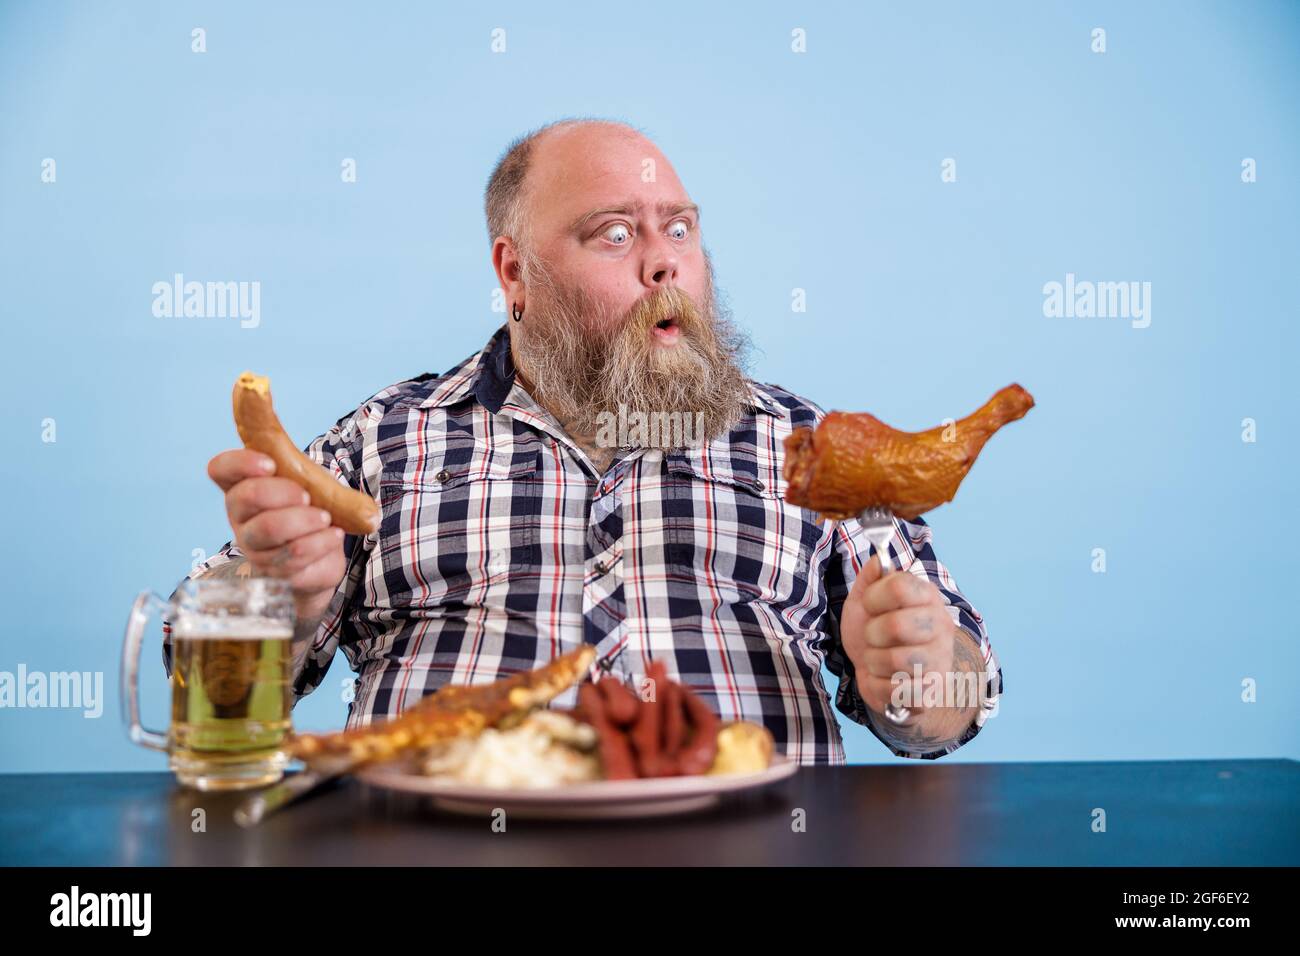 Shocked plus size man looks at chicken leg at table with fat food and beer Stock Photo